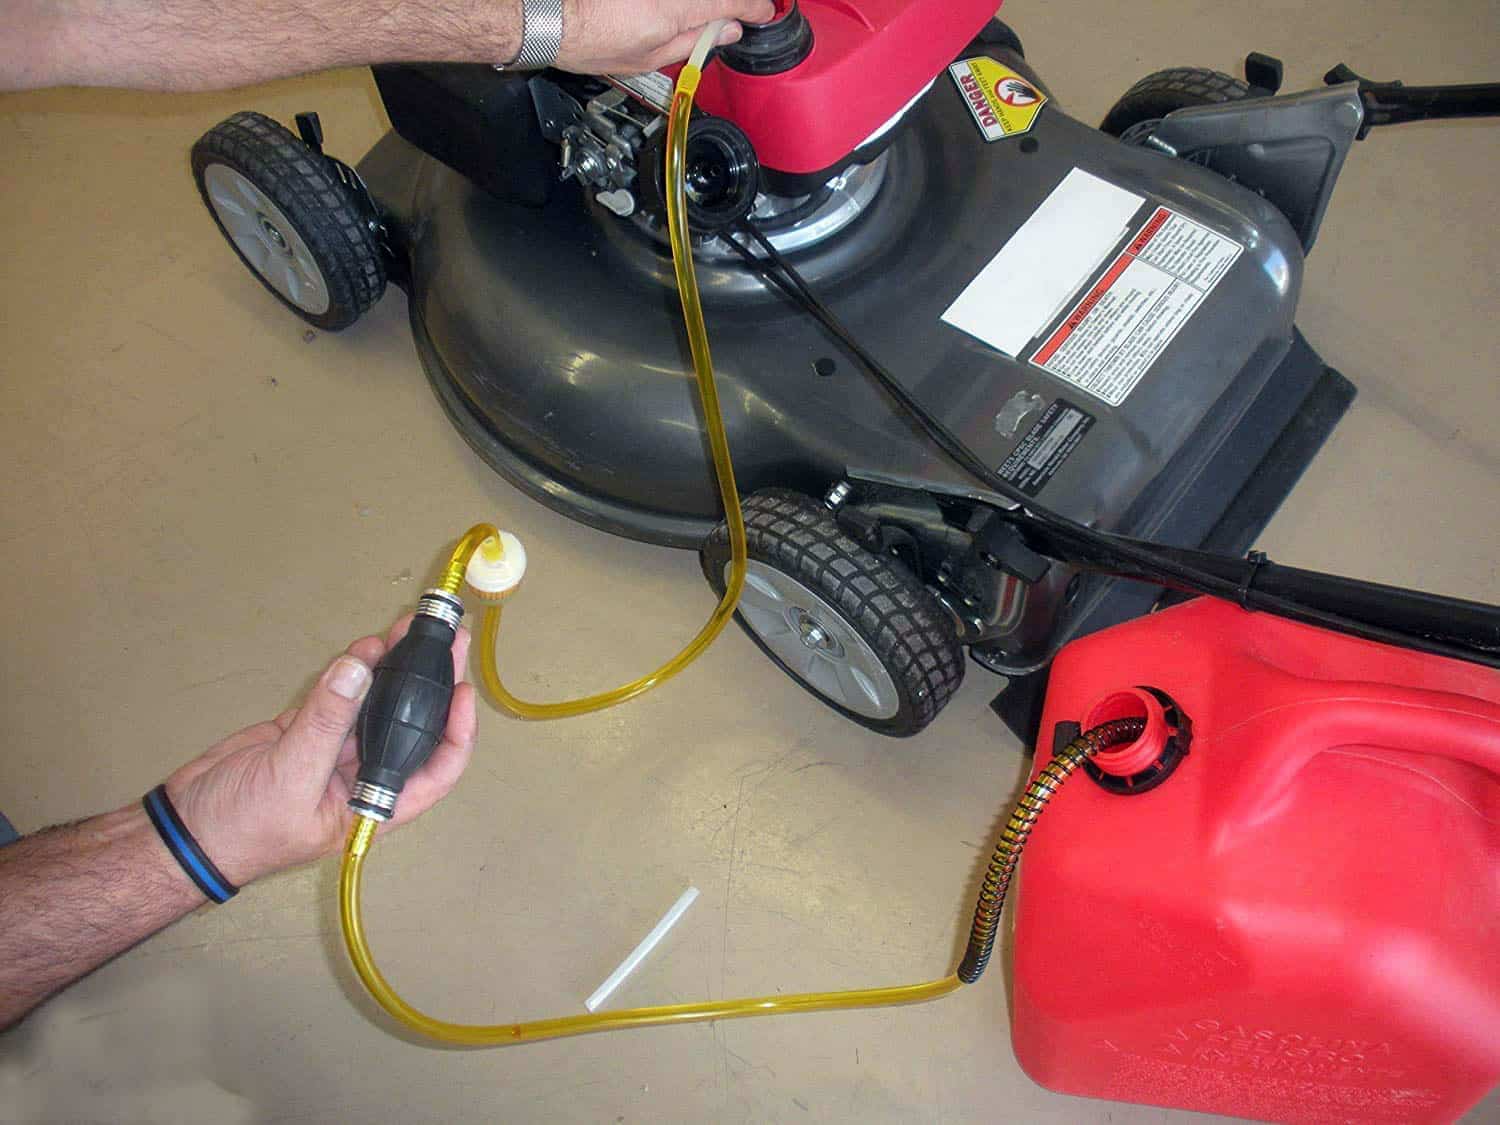 How To Drain Gas From A Lawn Mower Step By Step